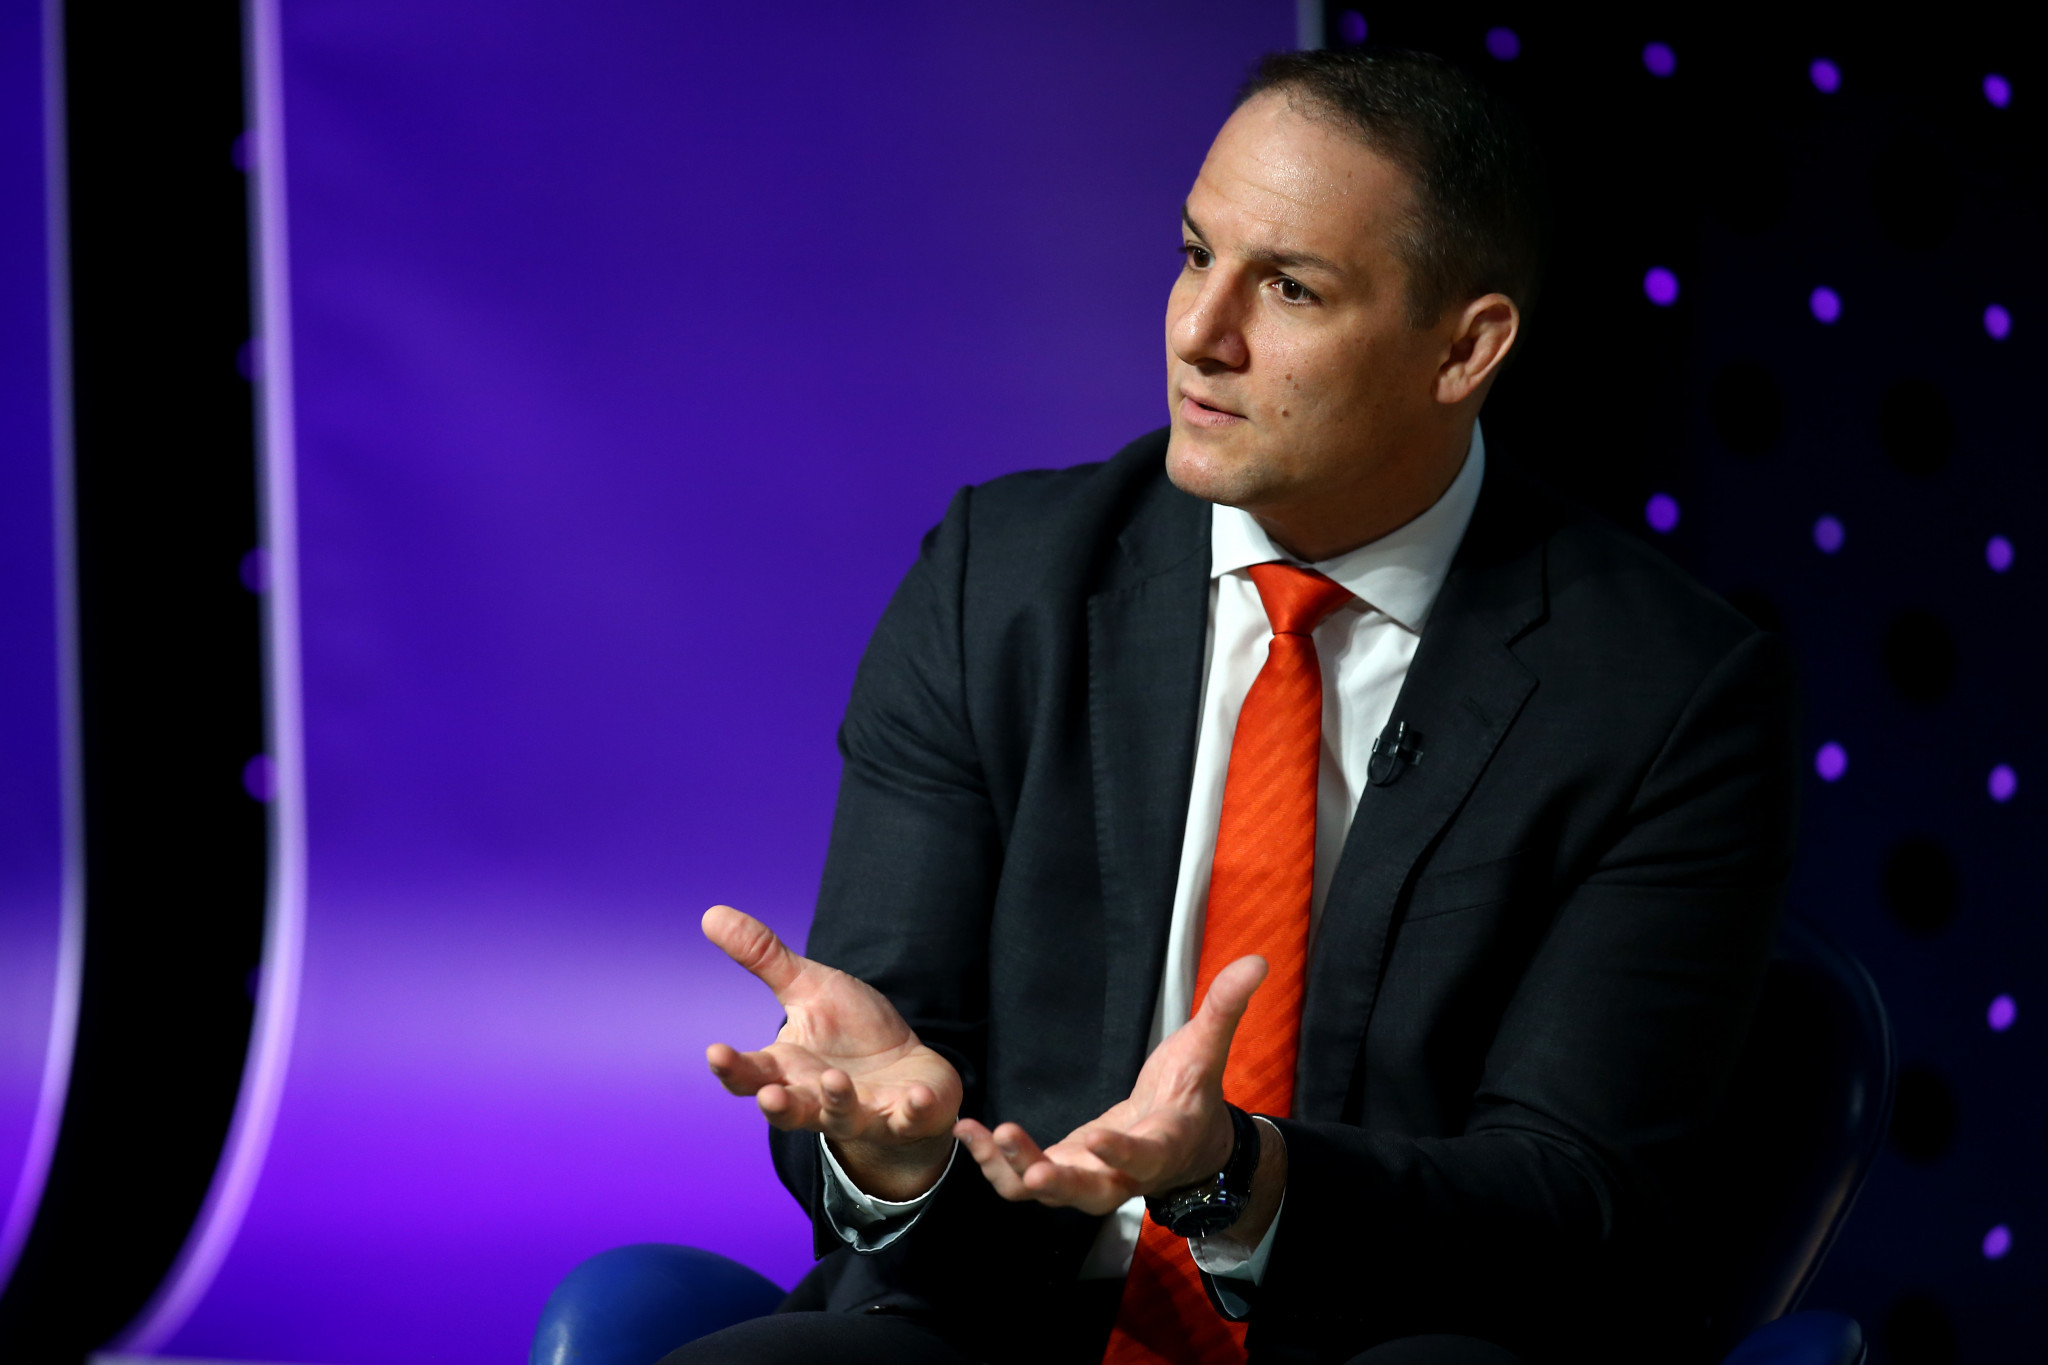 Former Commonwealth Games Federation chief executive David Grevemberg is joining the Centre for Sport and Human Rights ©Getty Images